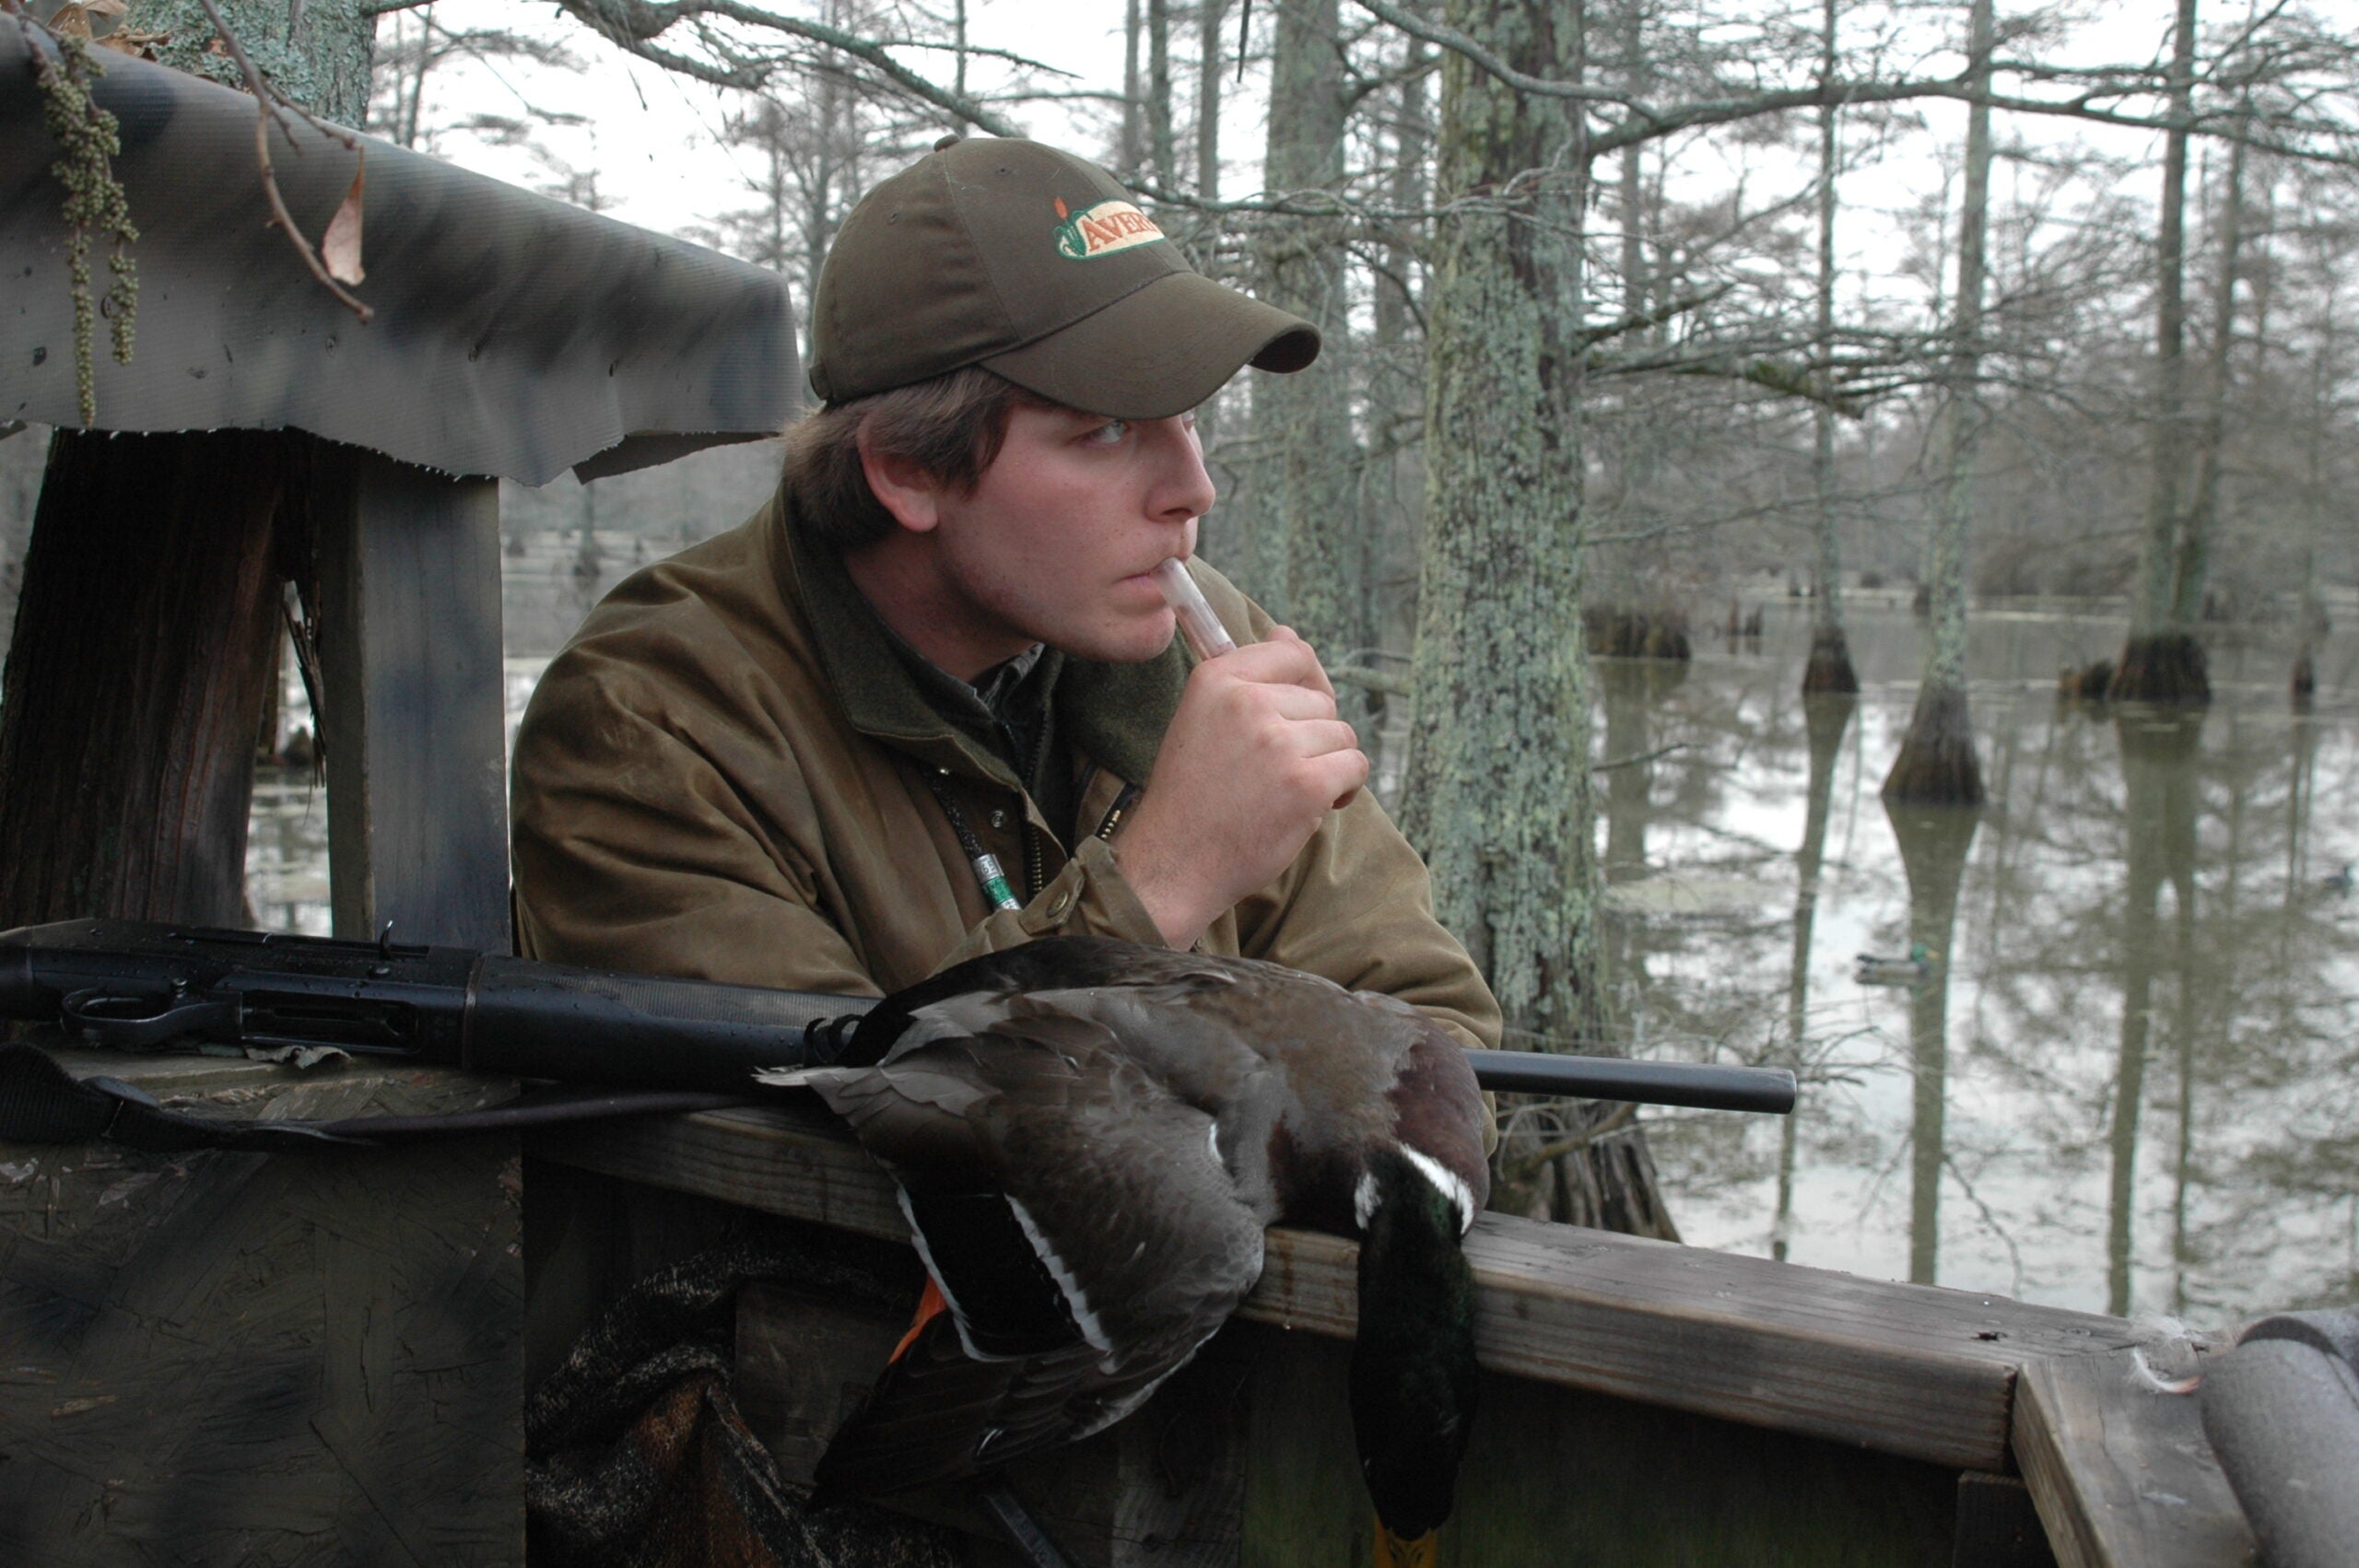 A man calls a duck decoy while standing next to a boat.